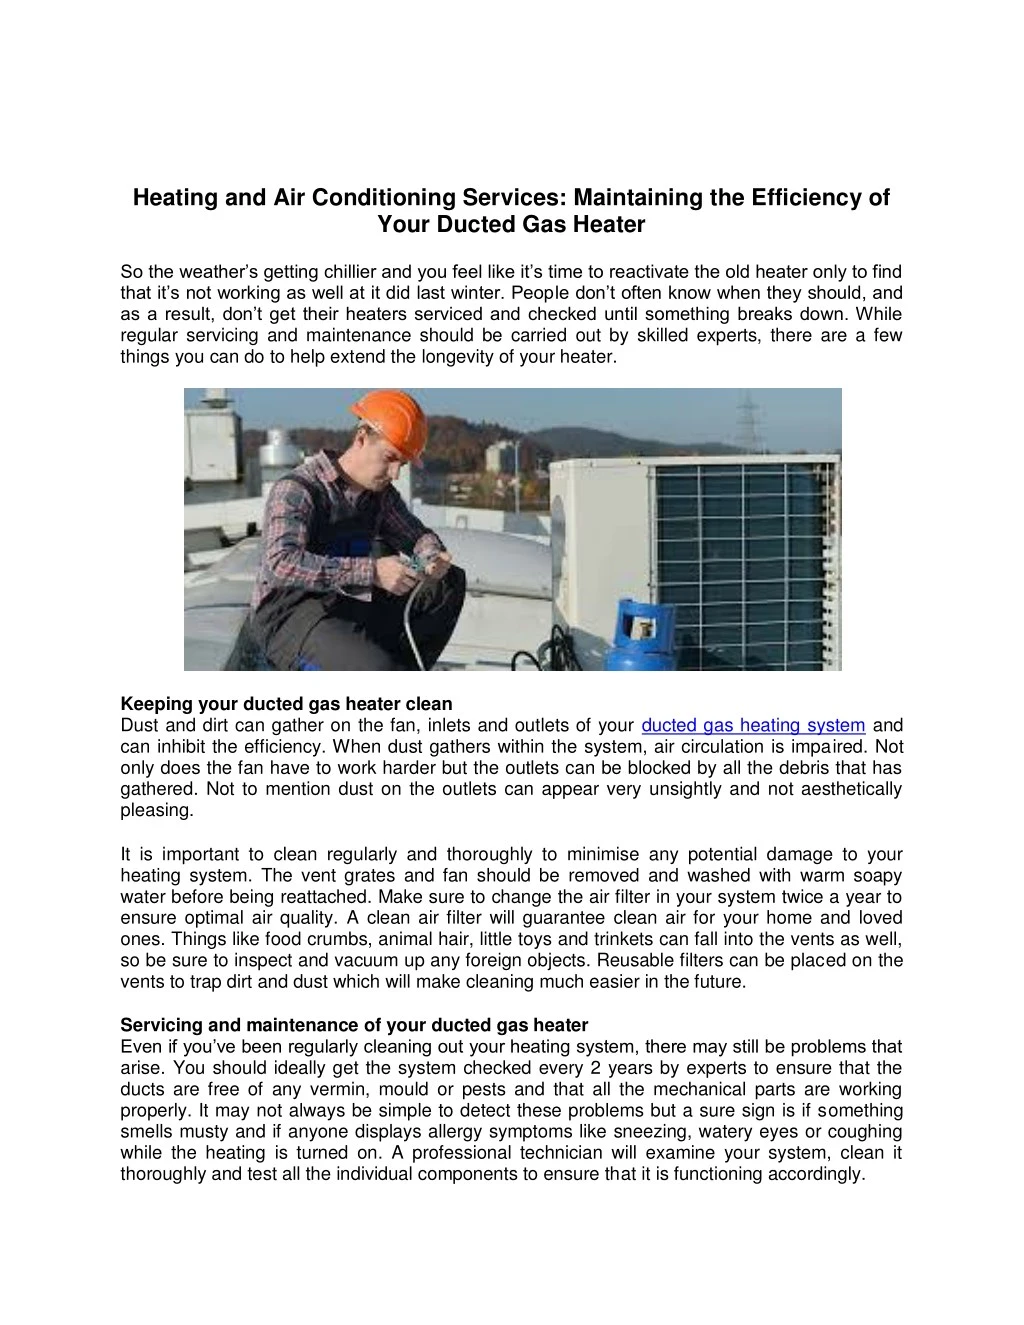 heating and air conditioning services maintaining